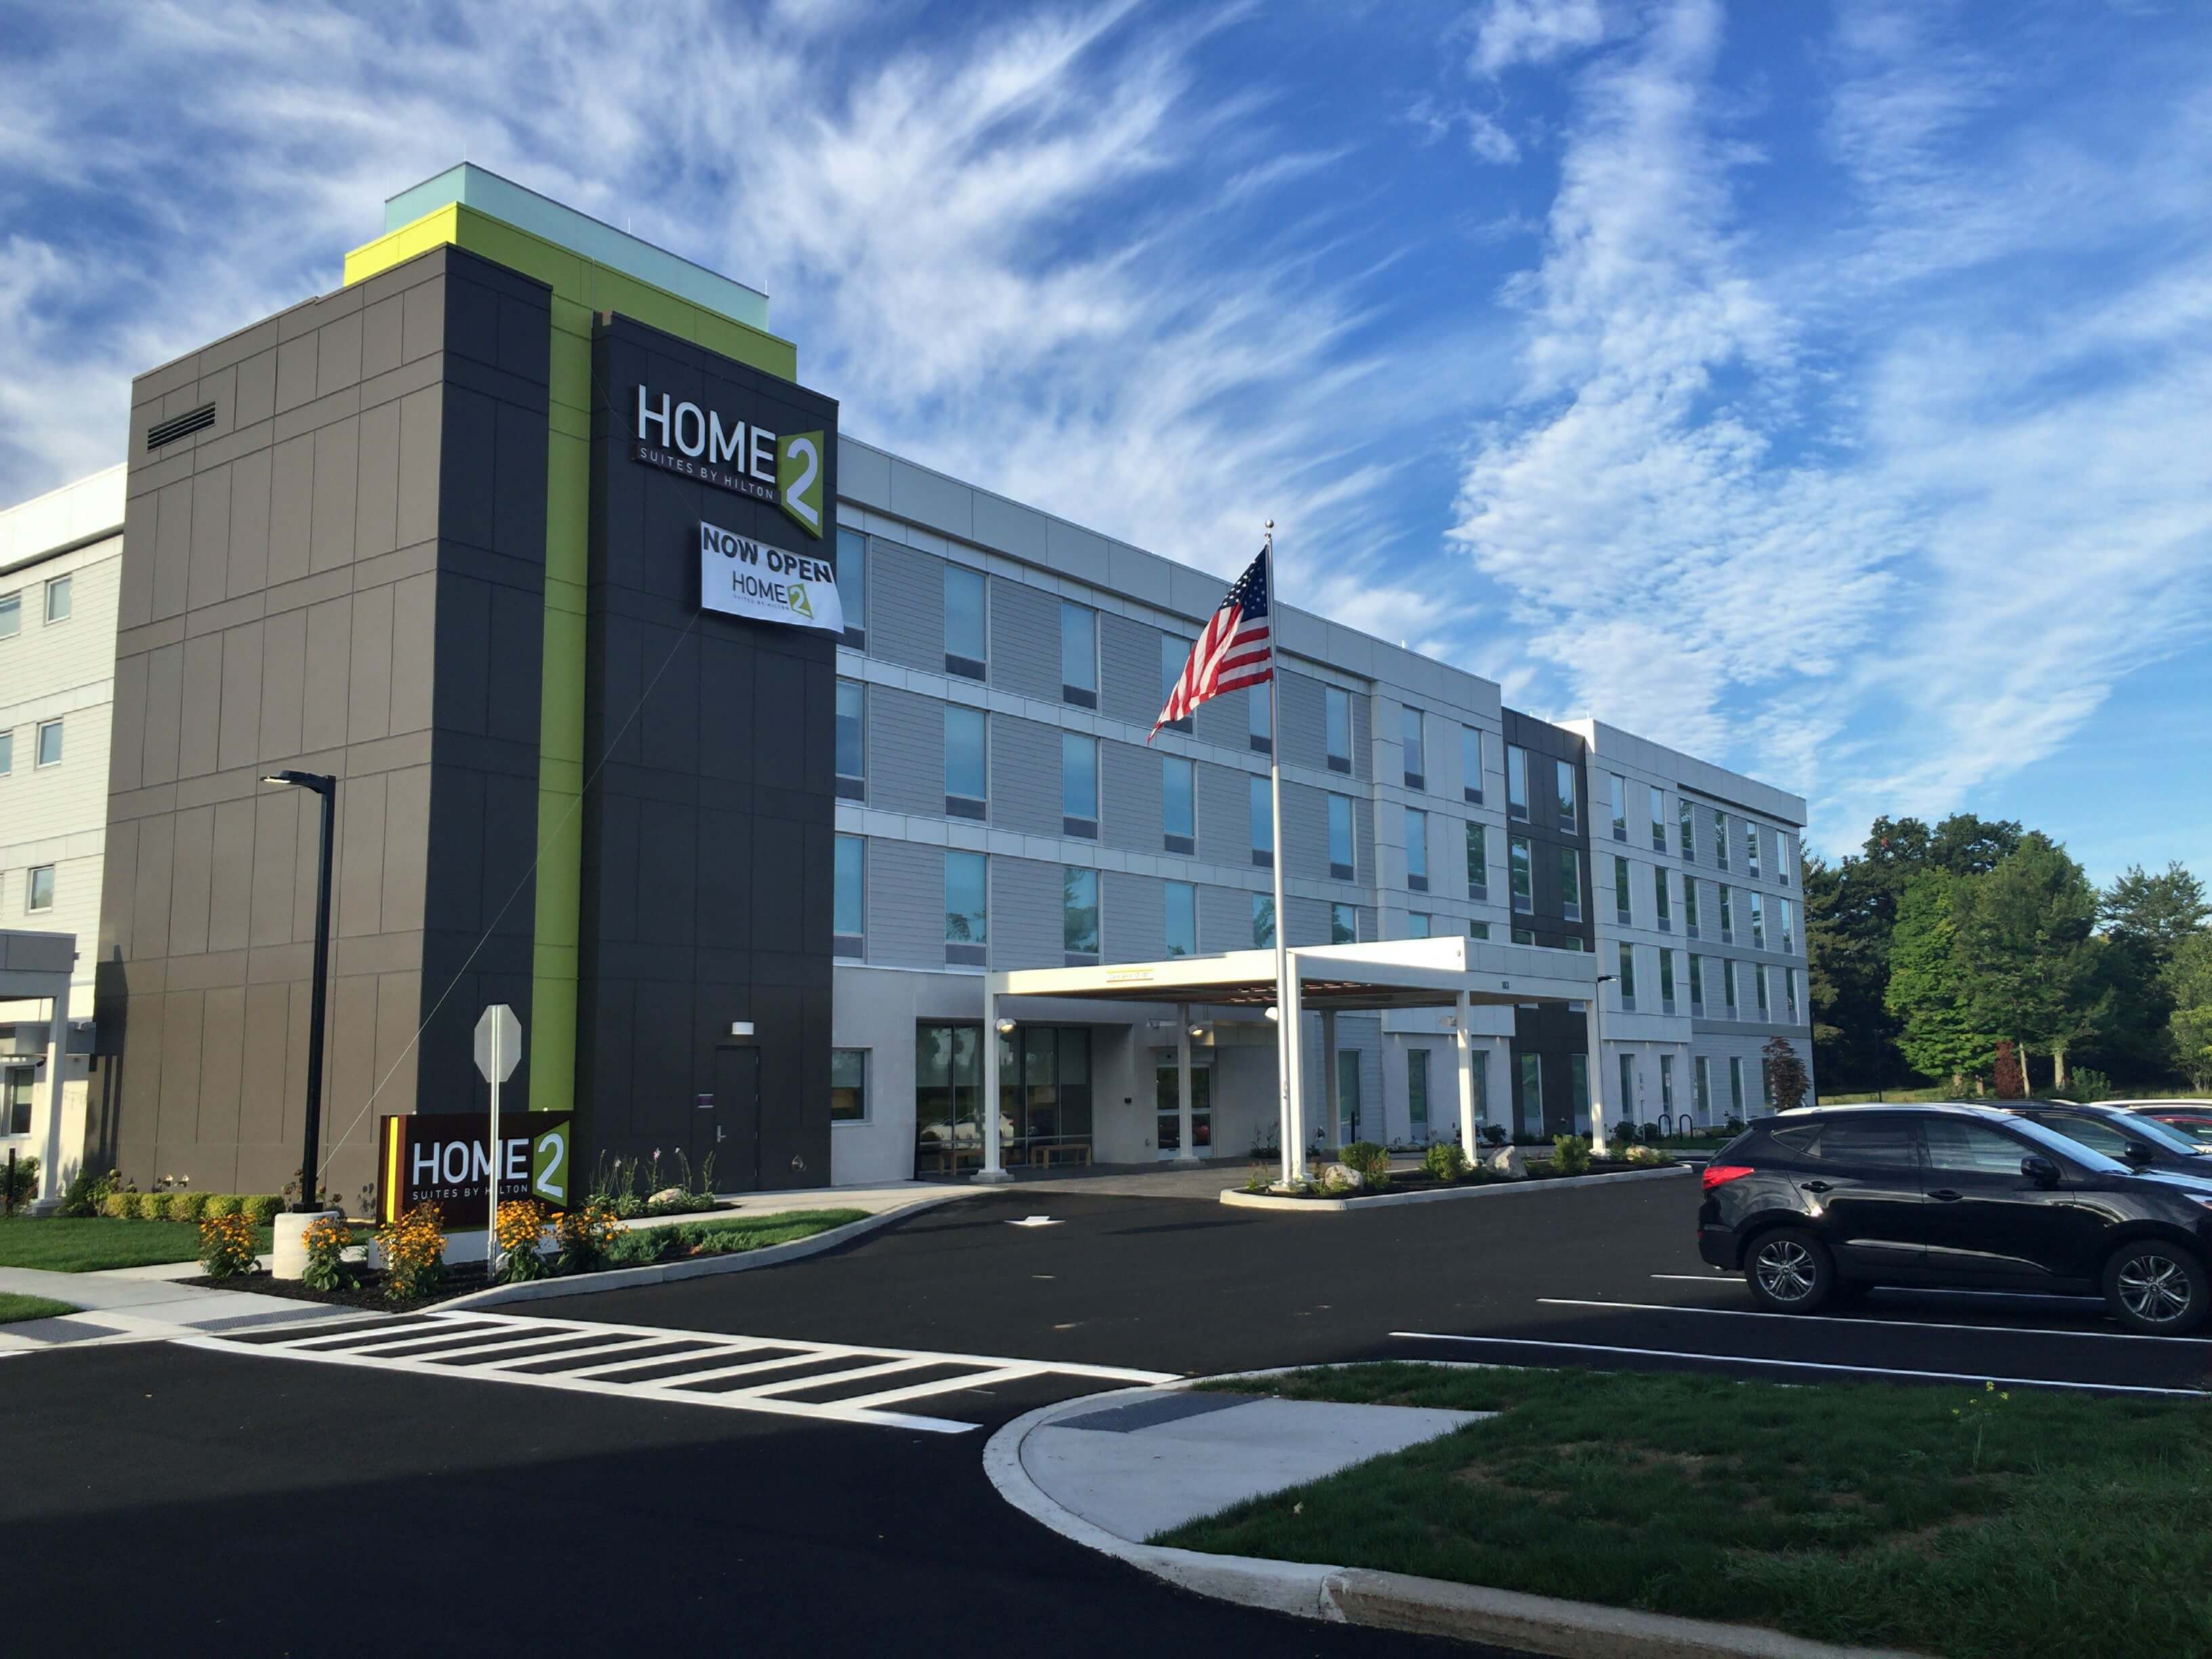 Home2 Suites by Hilton in Malta, NY